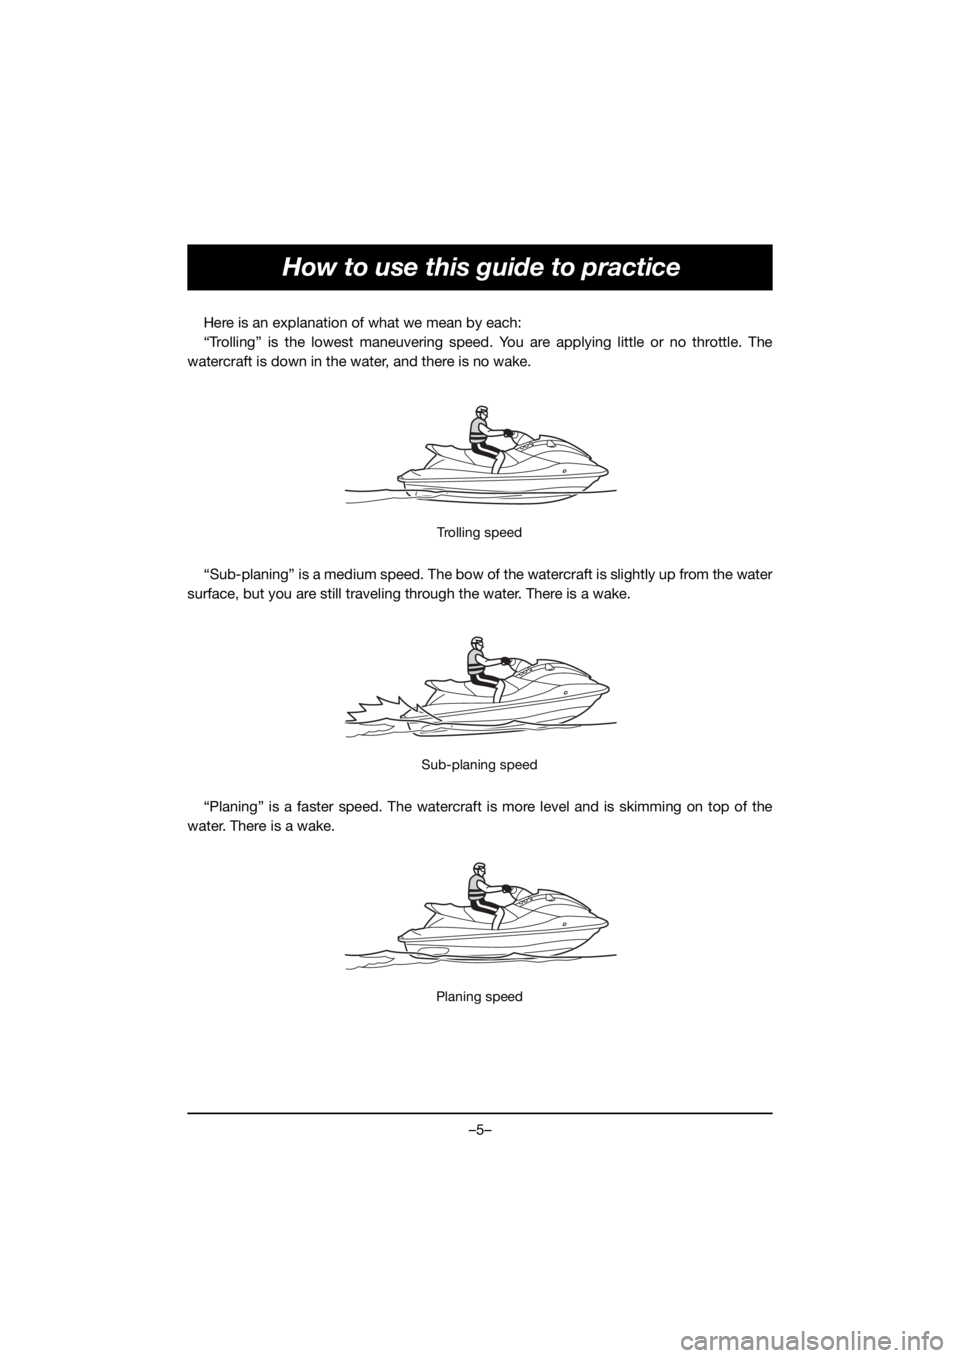 YAMAHA VX CRUISER HO 2020  Manuale duso (in Italian) –5–
How to use this guide to practice
Here is an explanation of what we mean by each:
“Trolling” is the lowest maneuvering speed. You are applying little or no throttle. The
watercraft is down